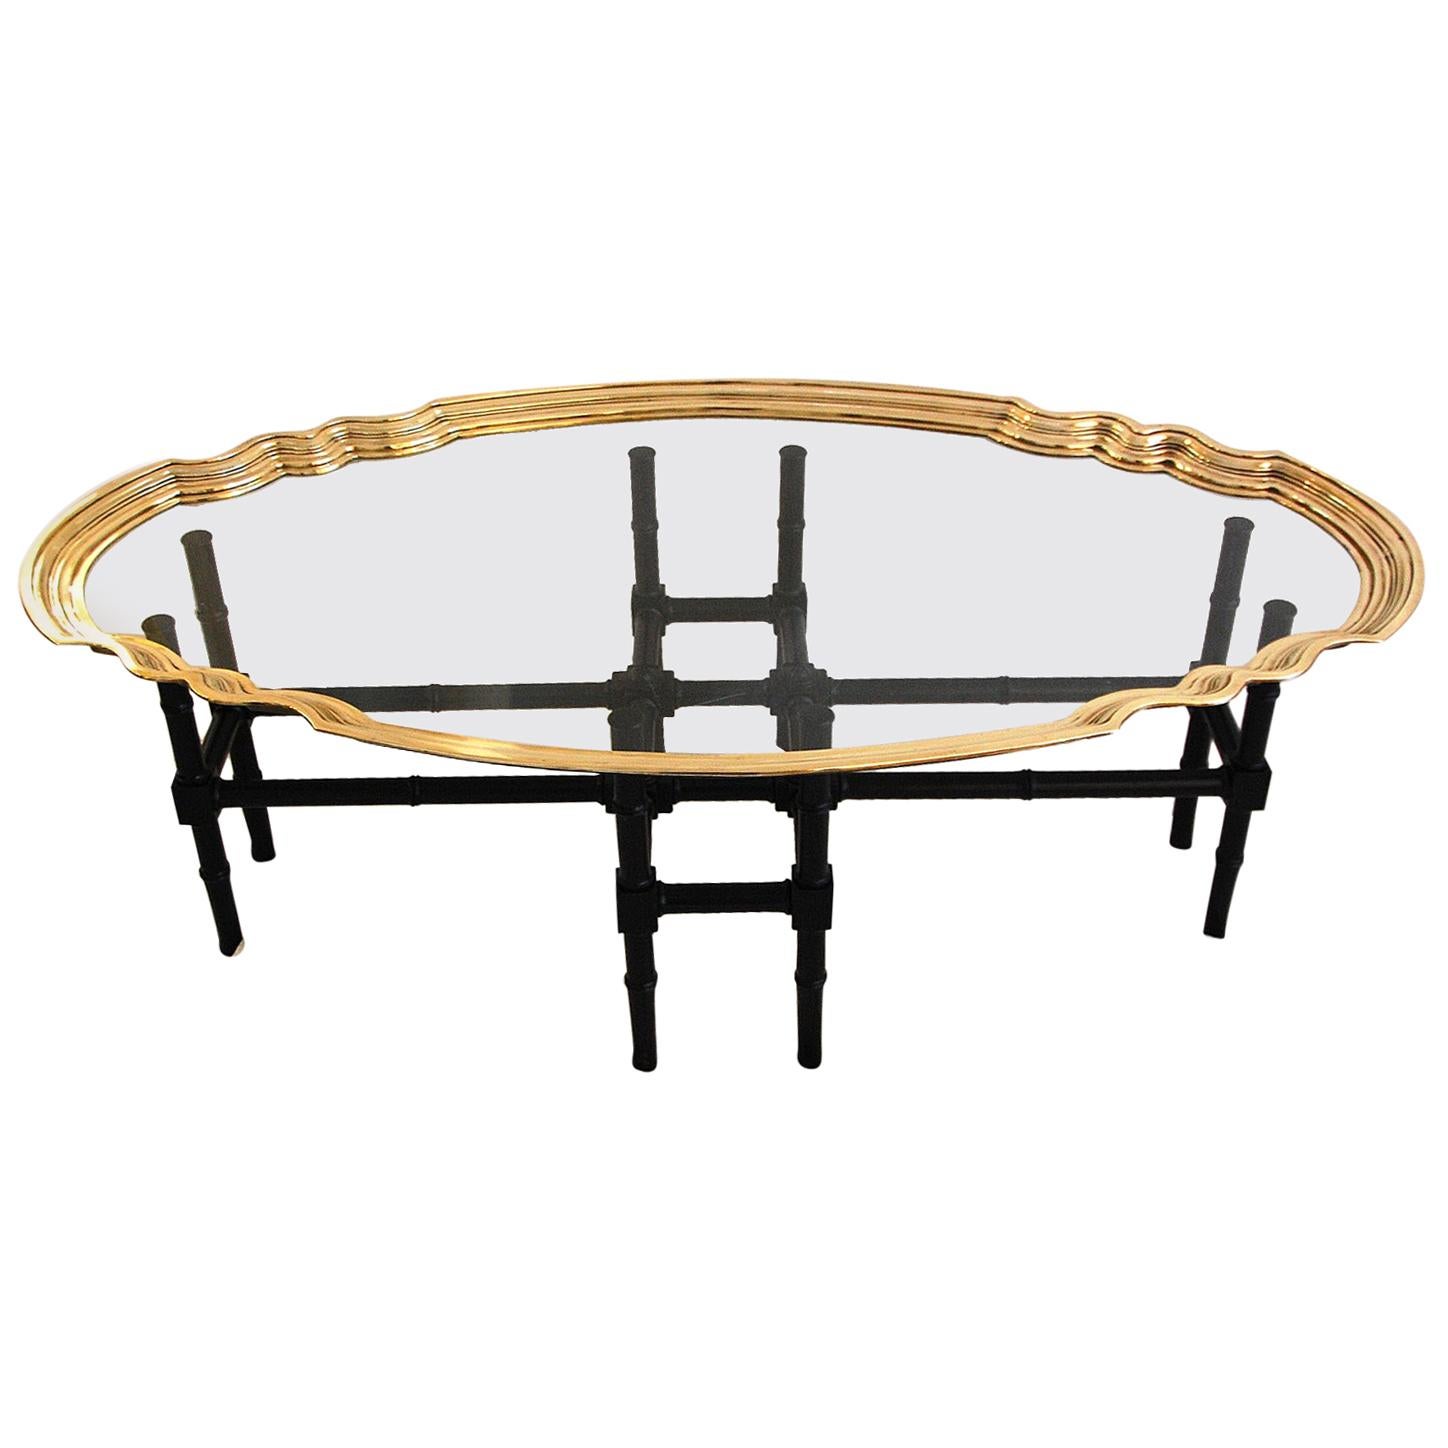 English Art Deco Brass and Glass Coffee Table